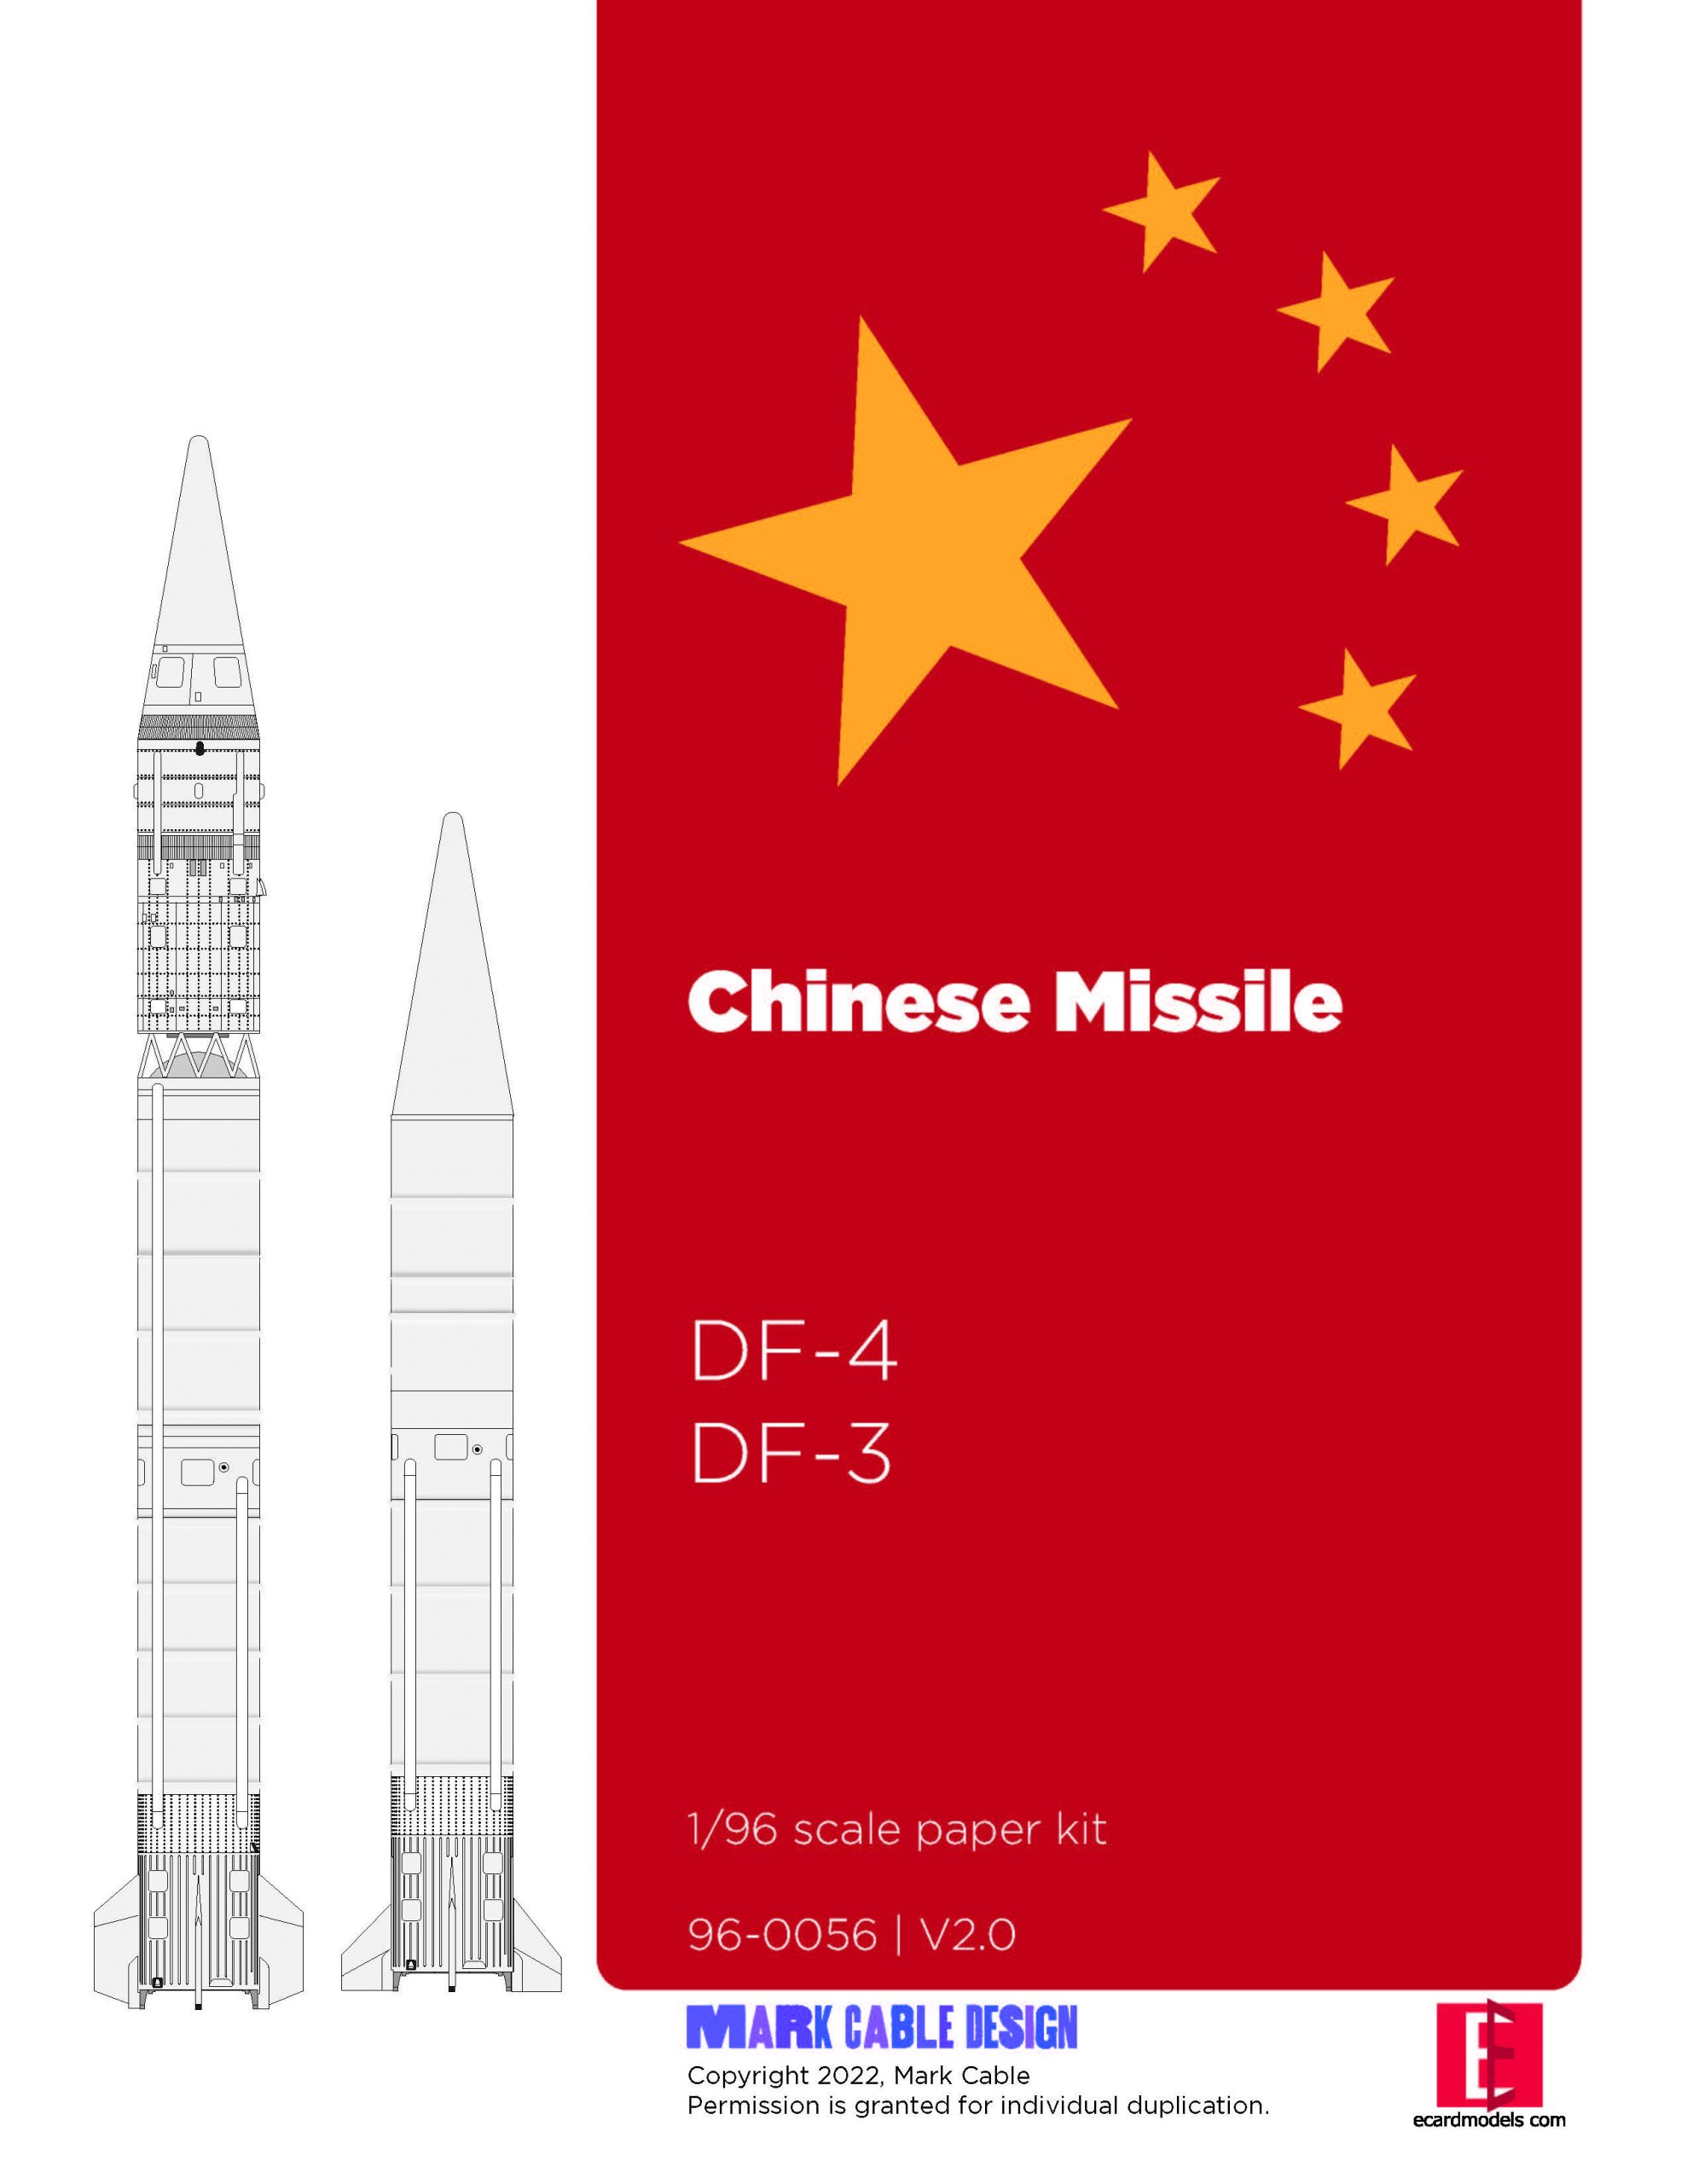 1/96 DF-3 and DF-4 Chinese Missiles Paper Model